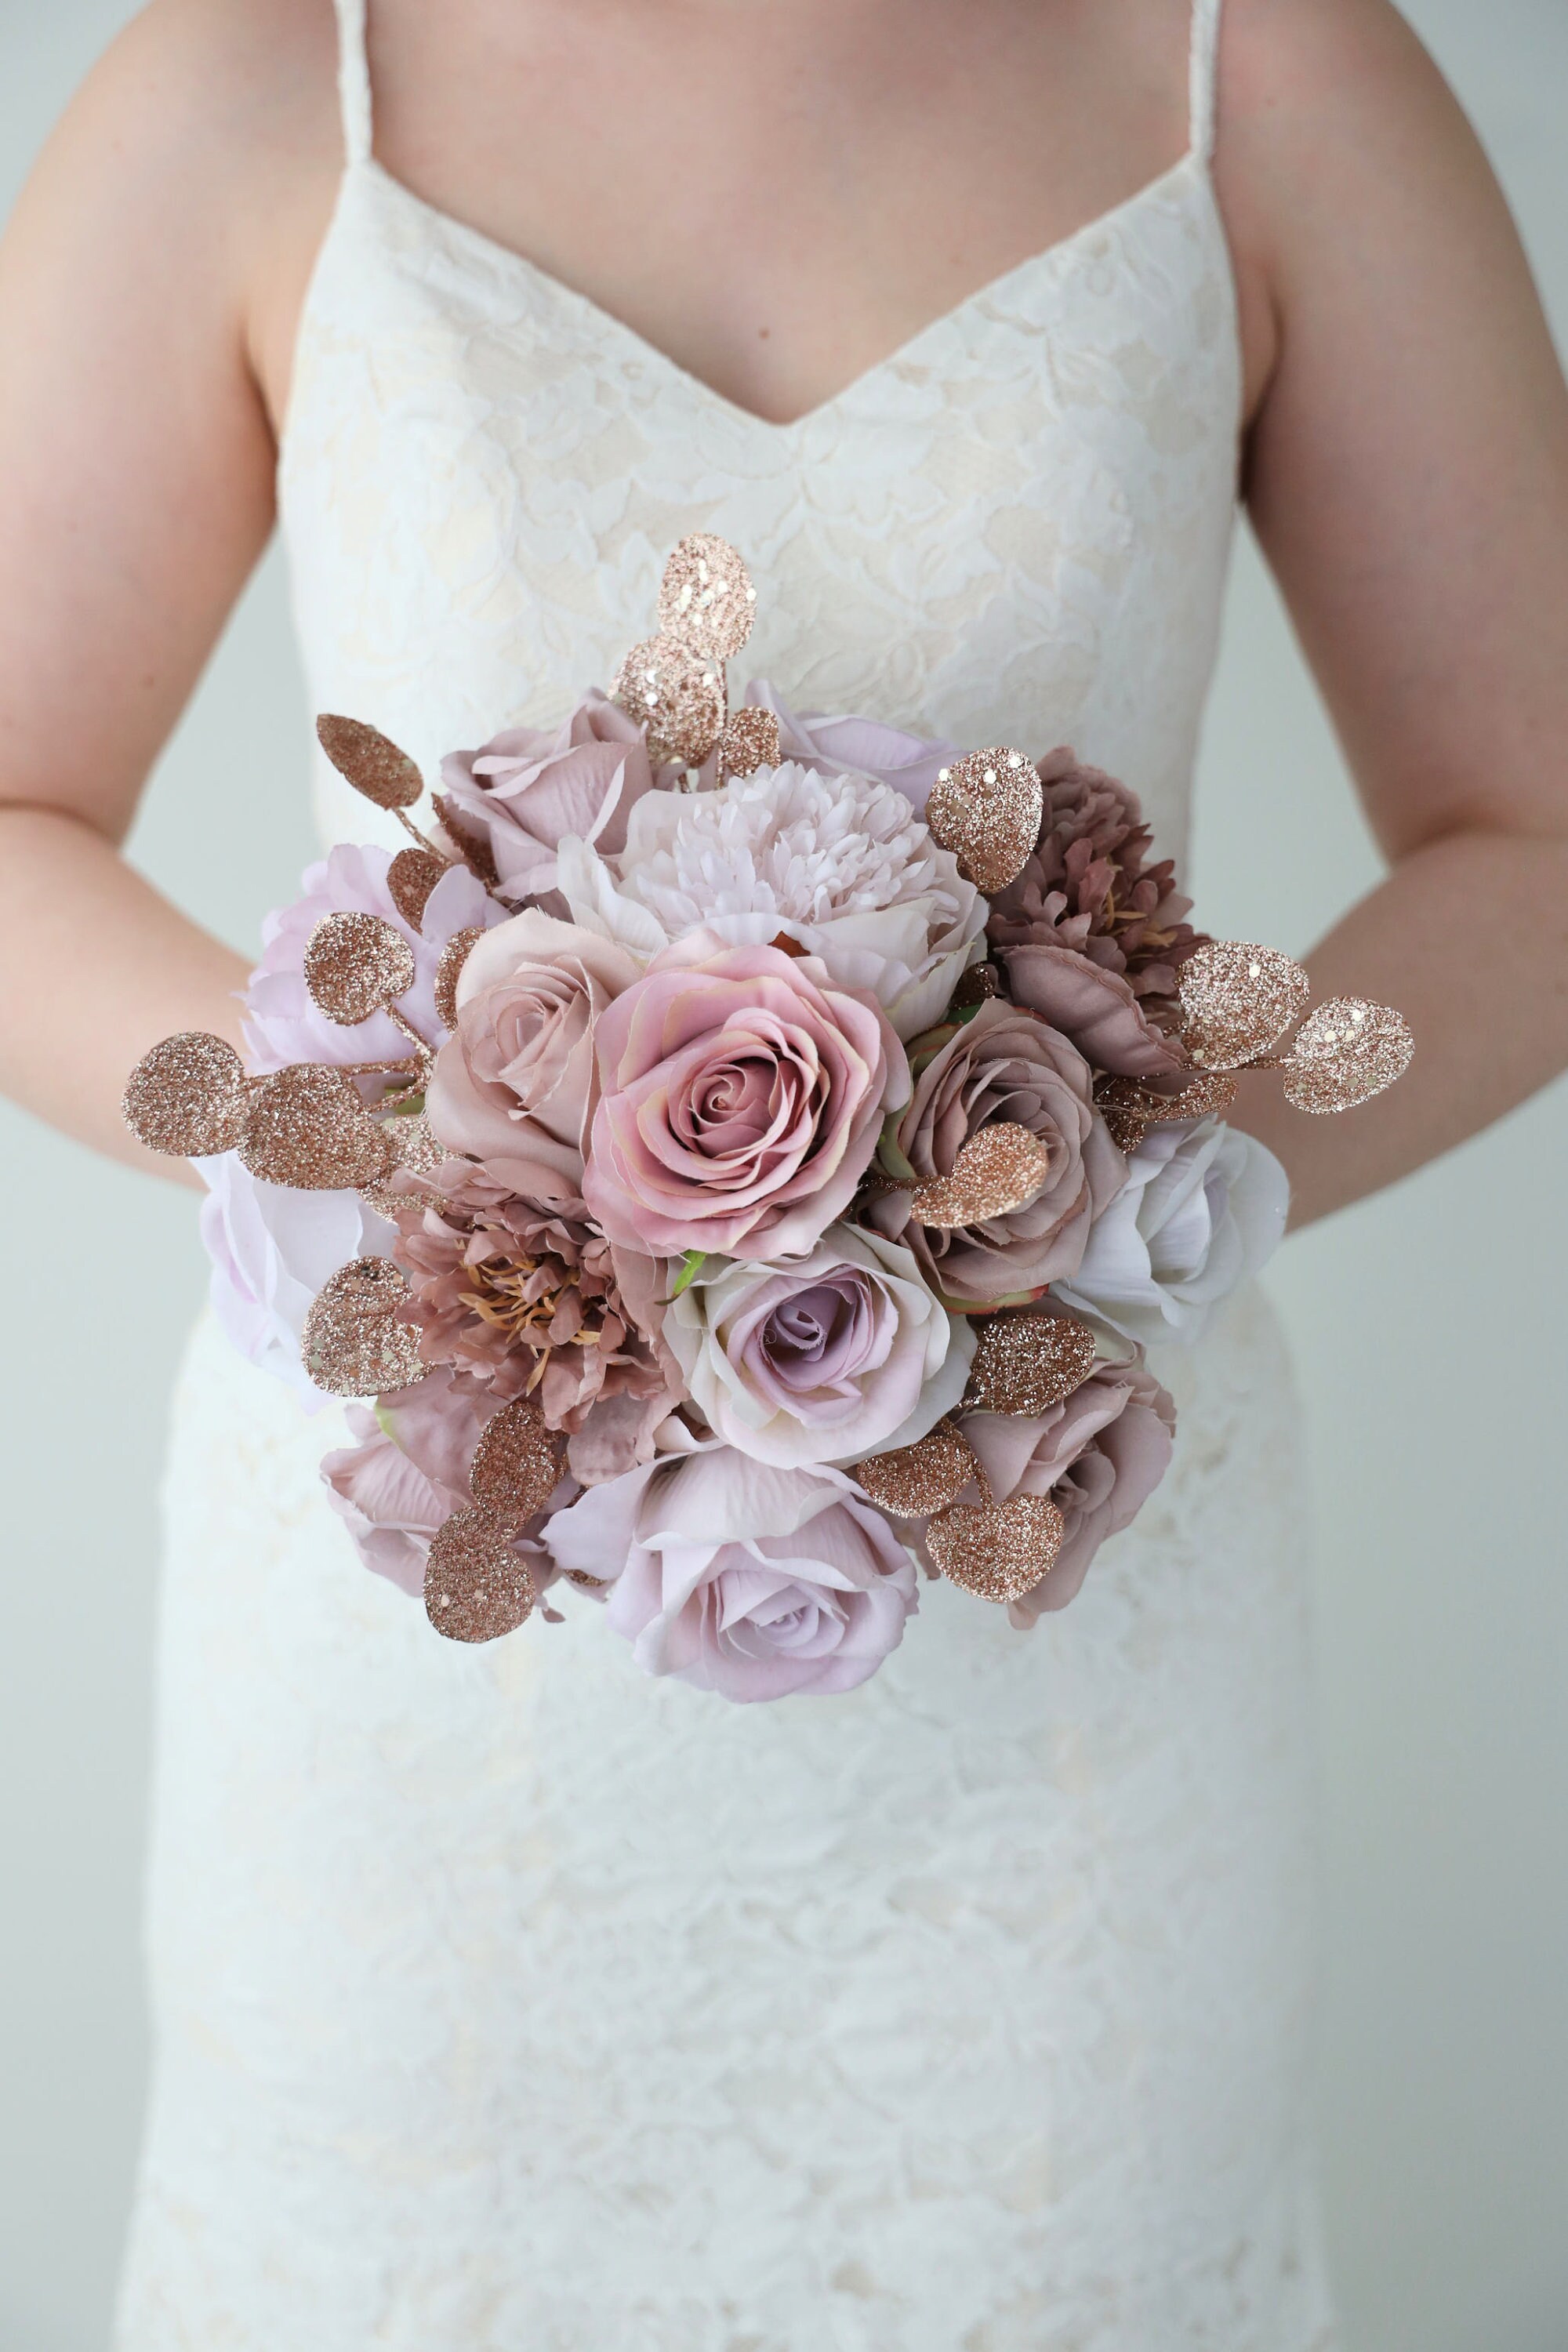 USA stores Rose Gold and Bridal Mauve Wedding Brides Bouquet Bouquet  Bouquet - Wedding Set Ships .com: Piece the 17 Next Day - ID #110 